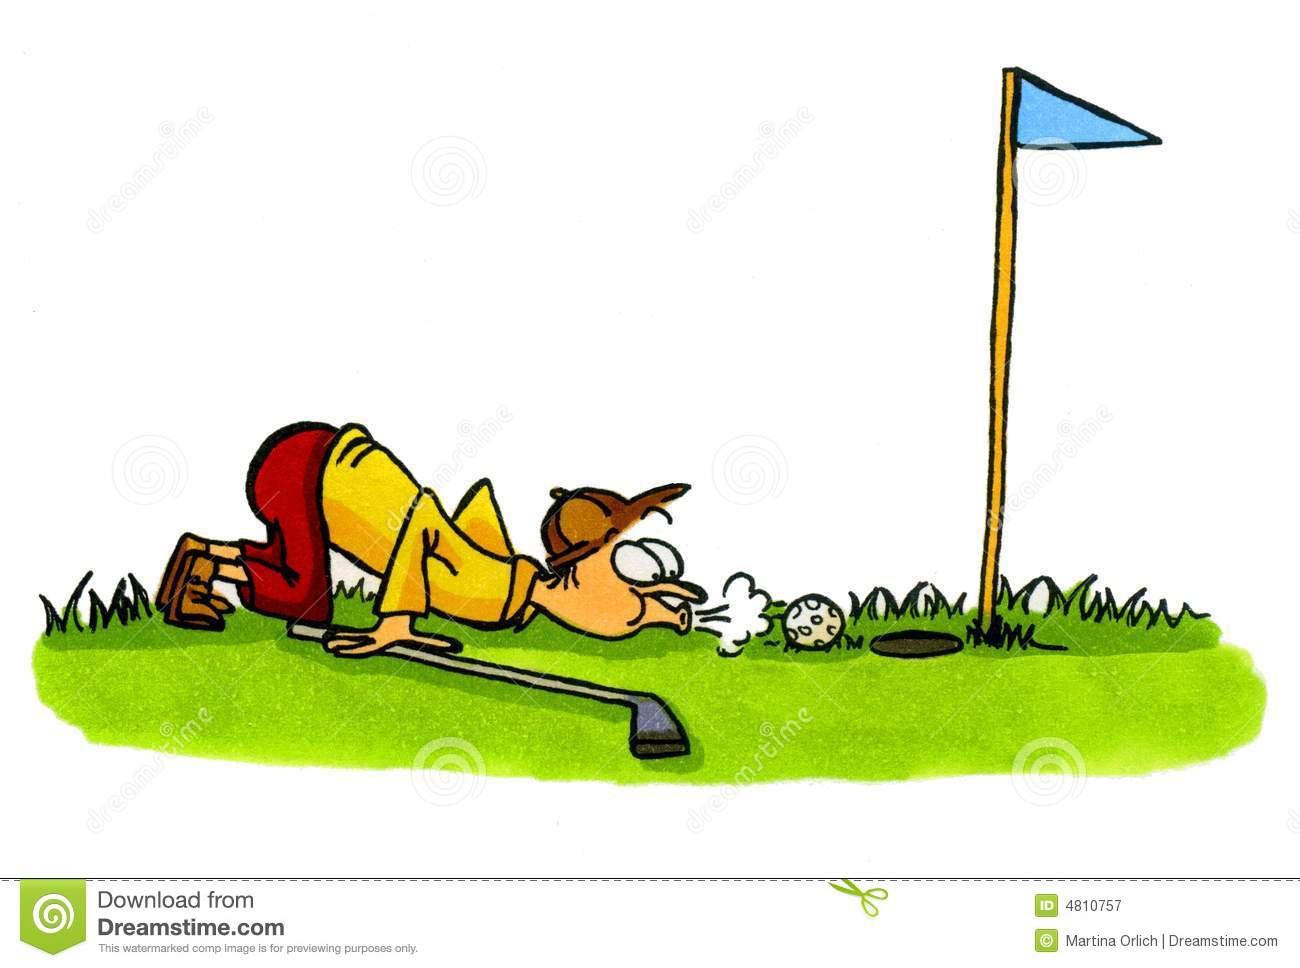 Royalty Free Golf Clipart